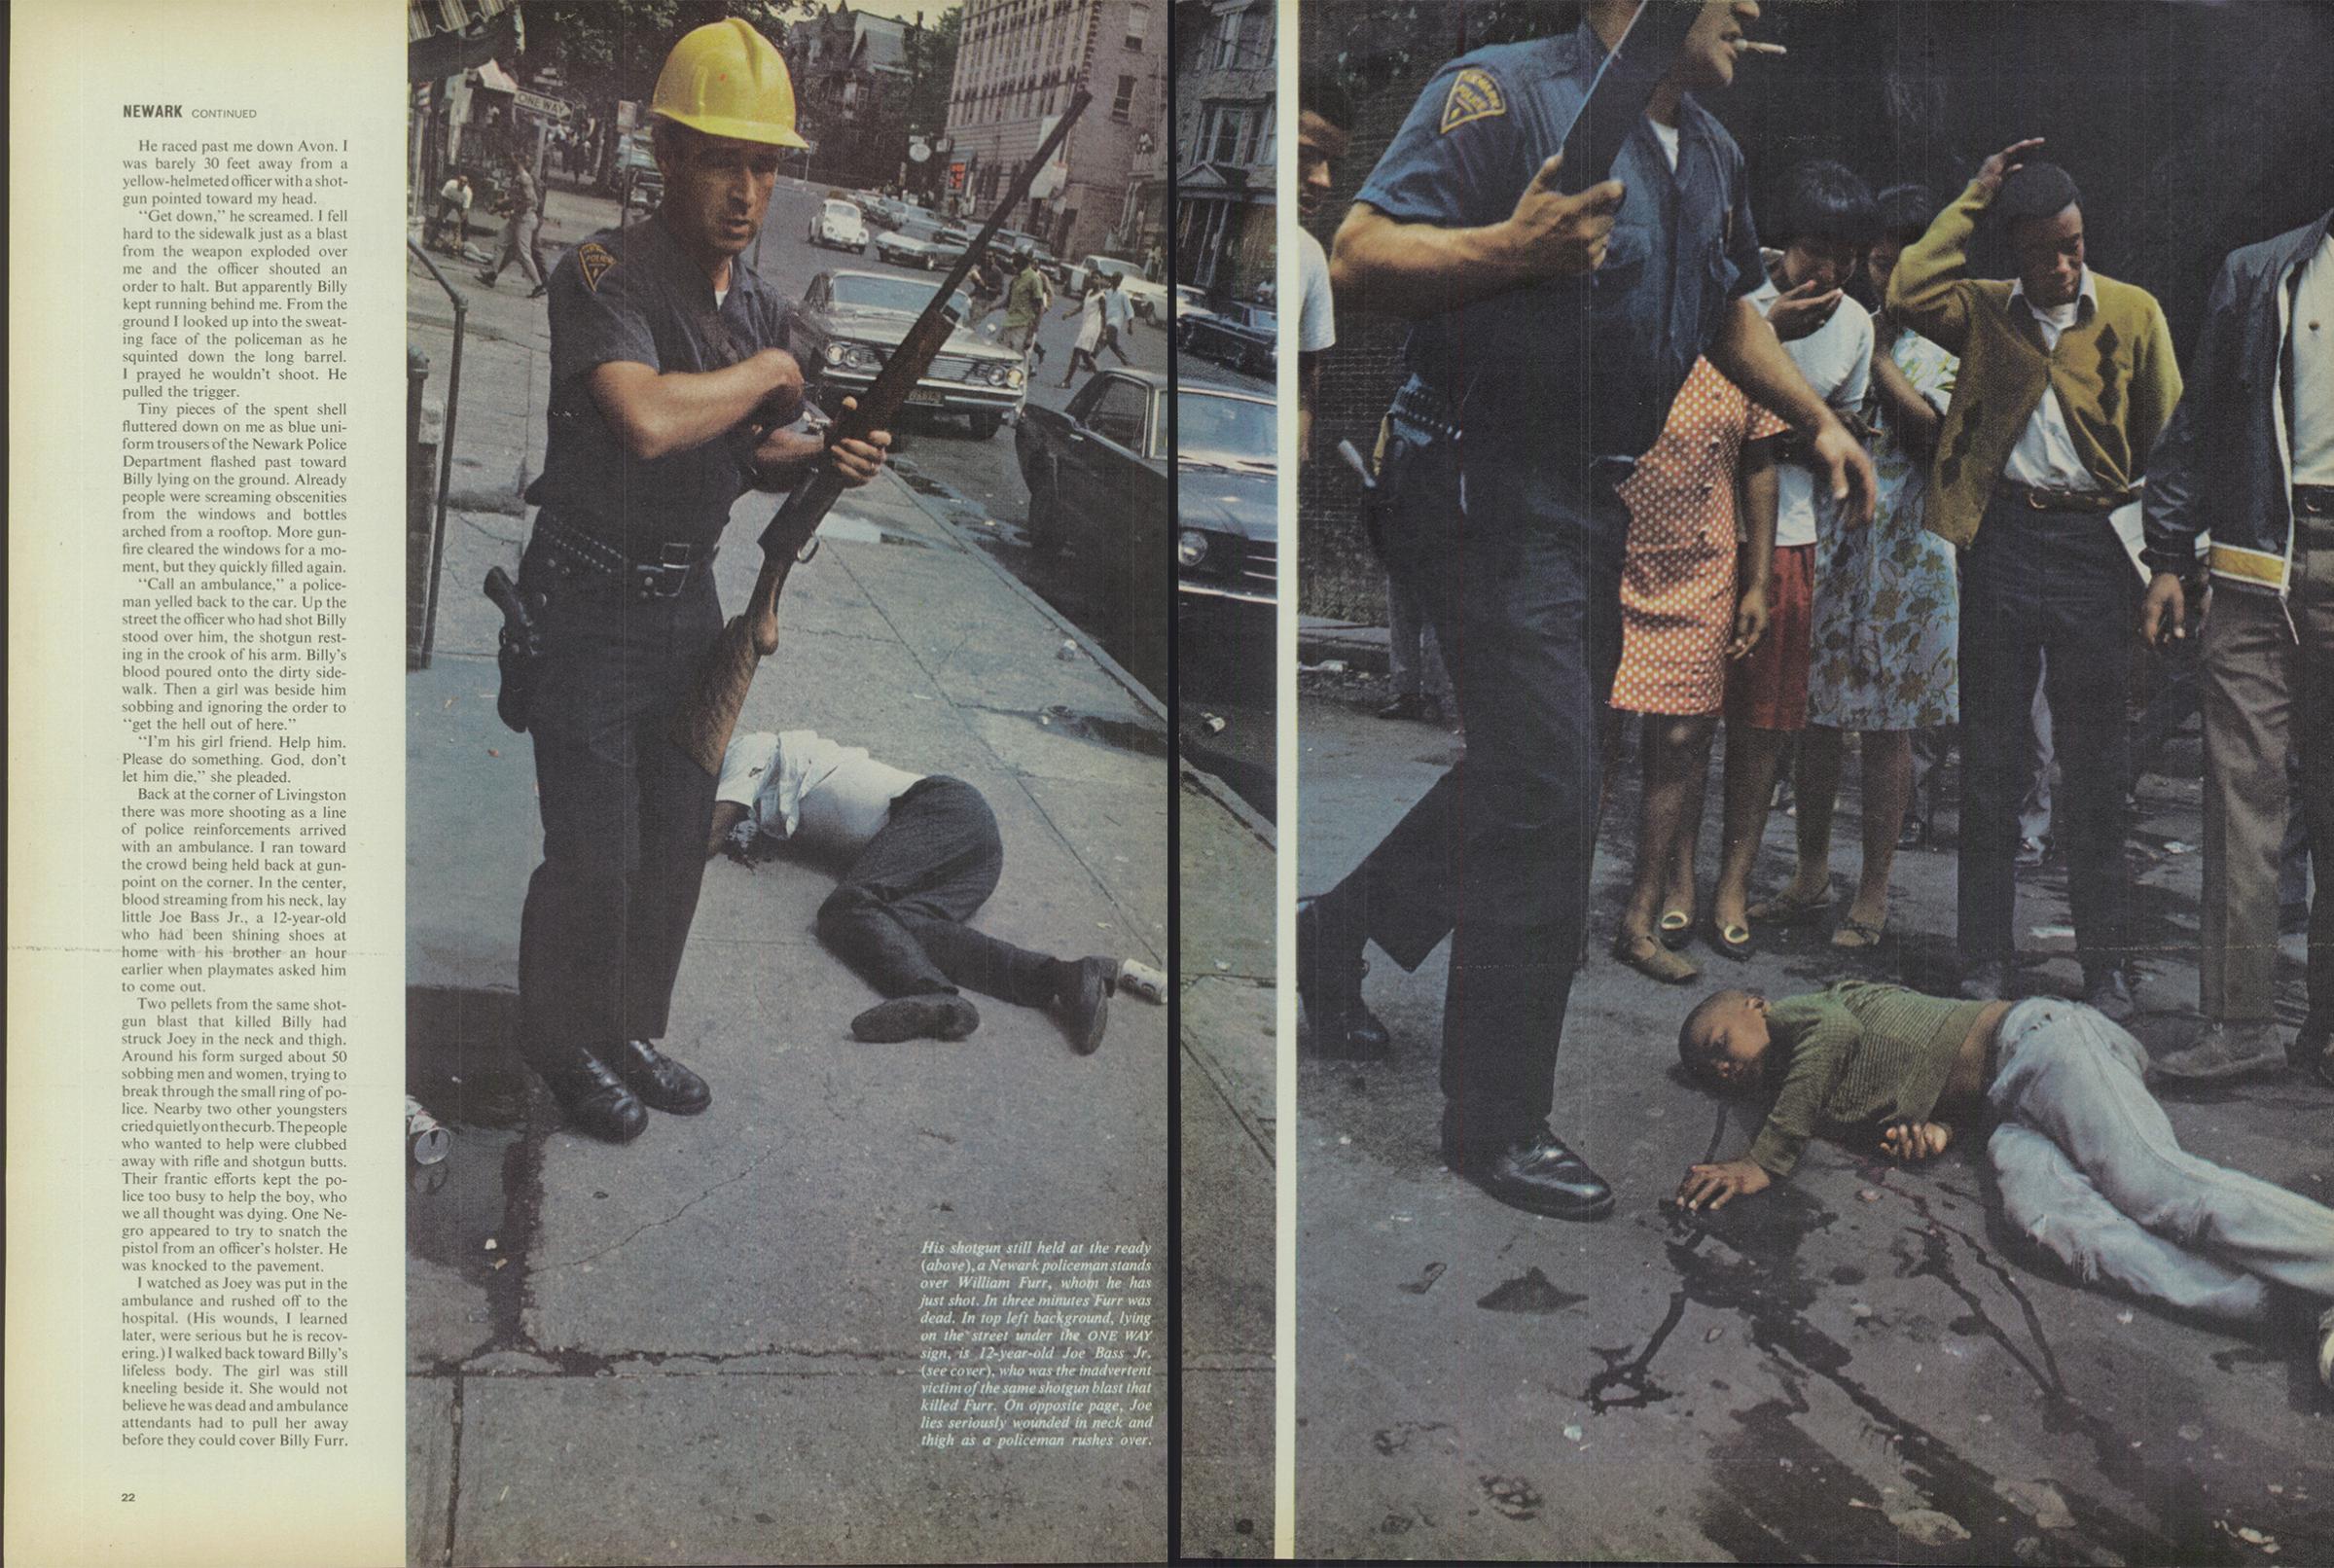 LIFE coverage of the Newark riots from the July 28, 1967 issue. Photos by Bud Lee.